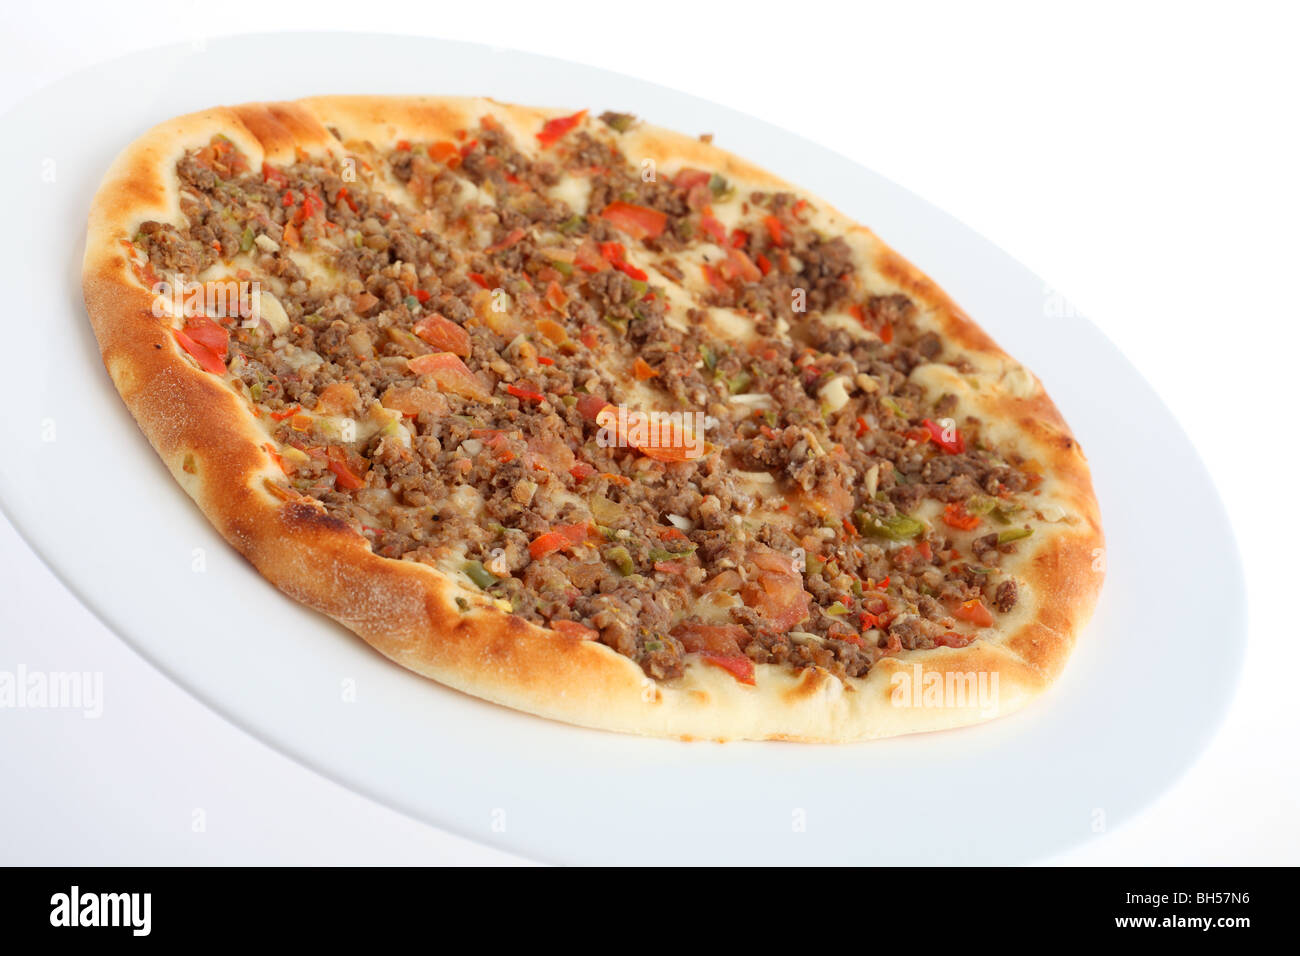 A fataya Arab bread, which is dough topped with meat and pickled vegetable sauce before baking. Stock Photo